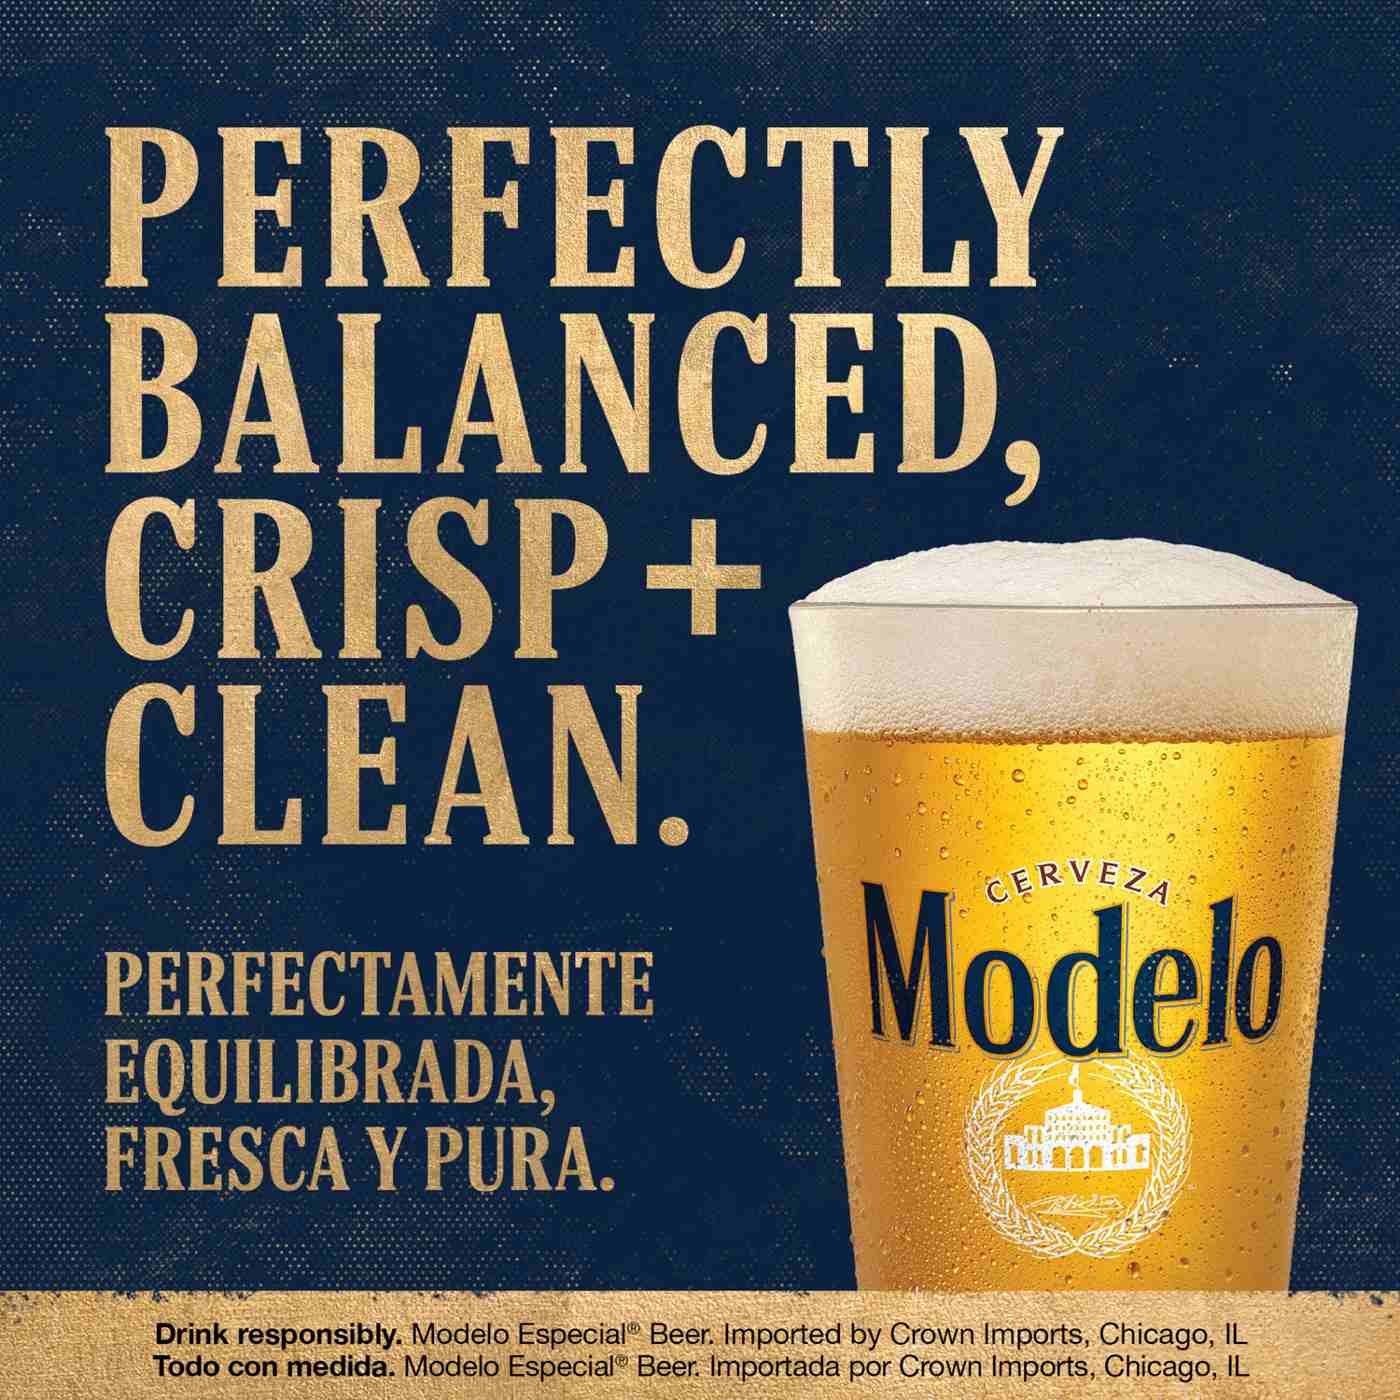 Modelo Especial Modelito Mexican Lager Import Beer 7 oz Bottles, 24 pk; image 8 of 11